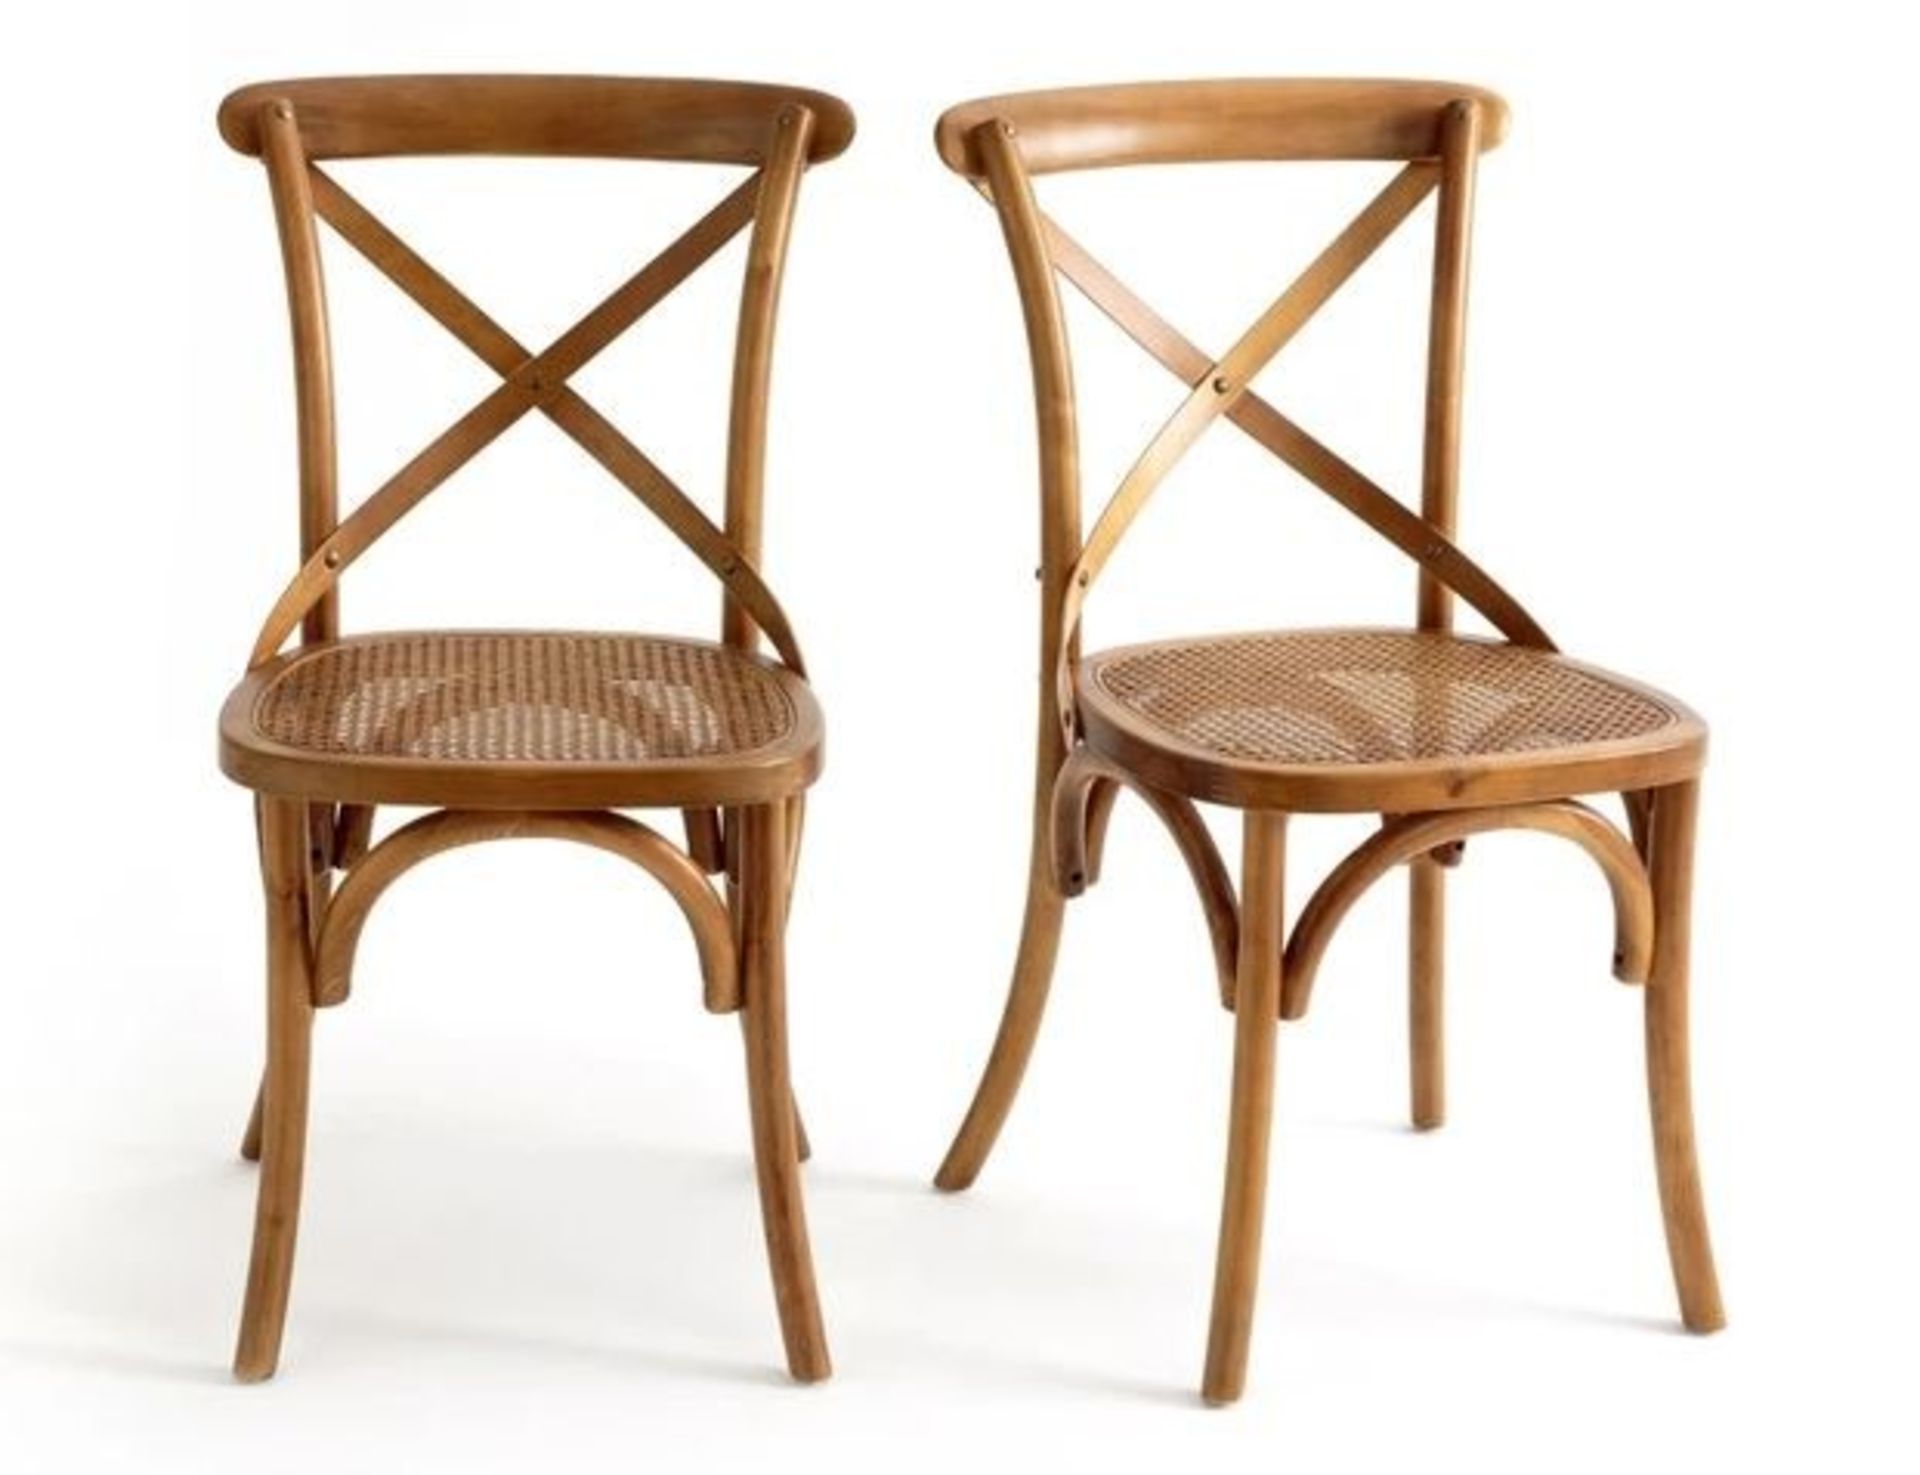 LA REDOUTE CEDAK SET OF 2 WOOD AND CANE CHAIRS